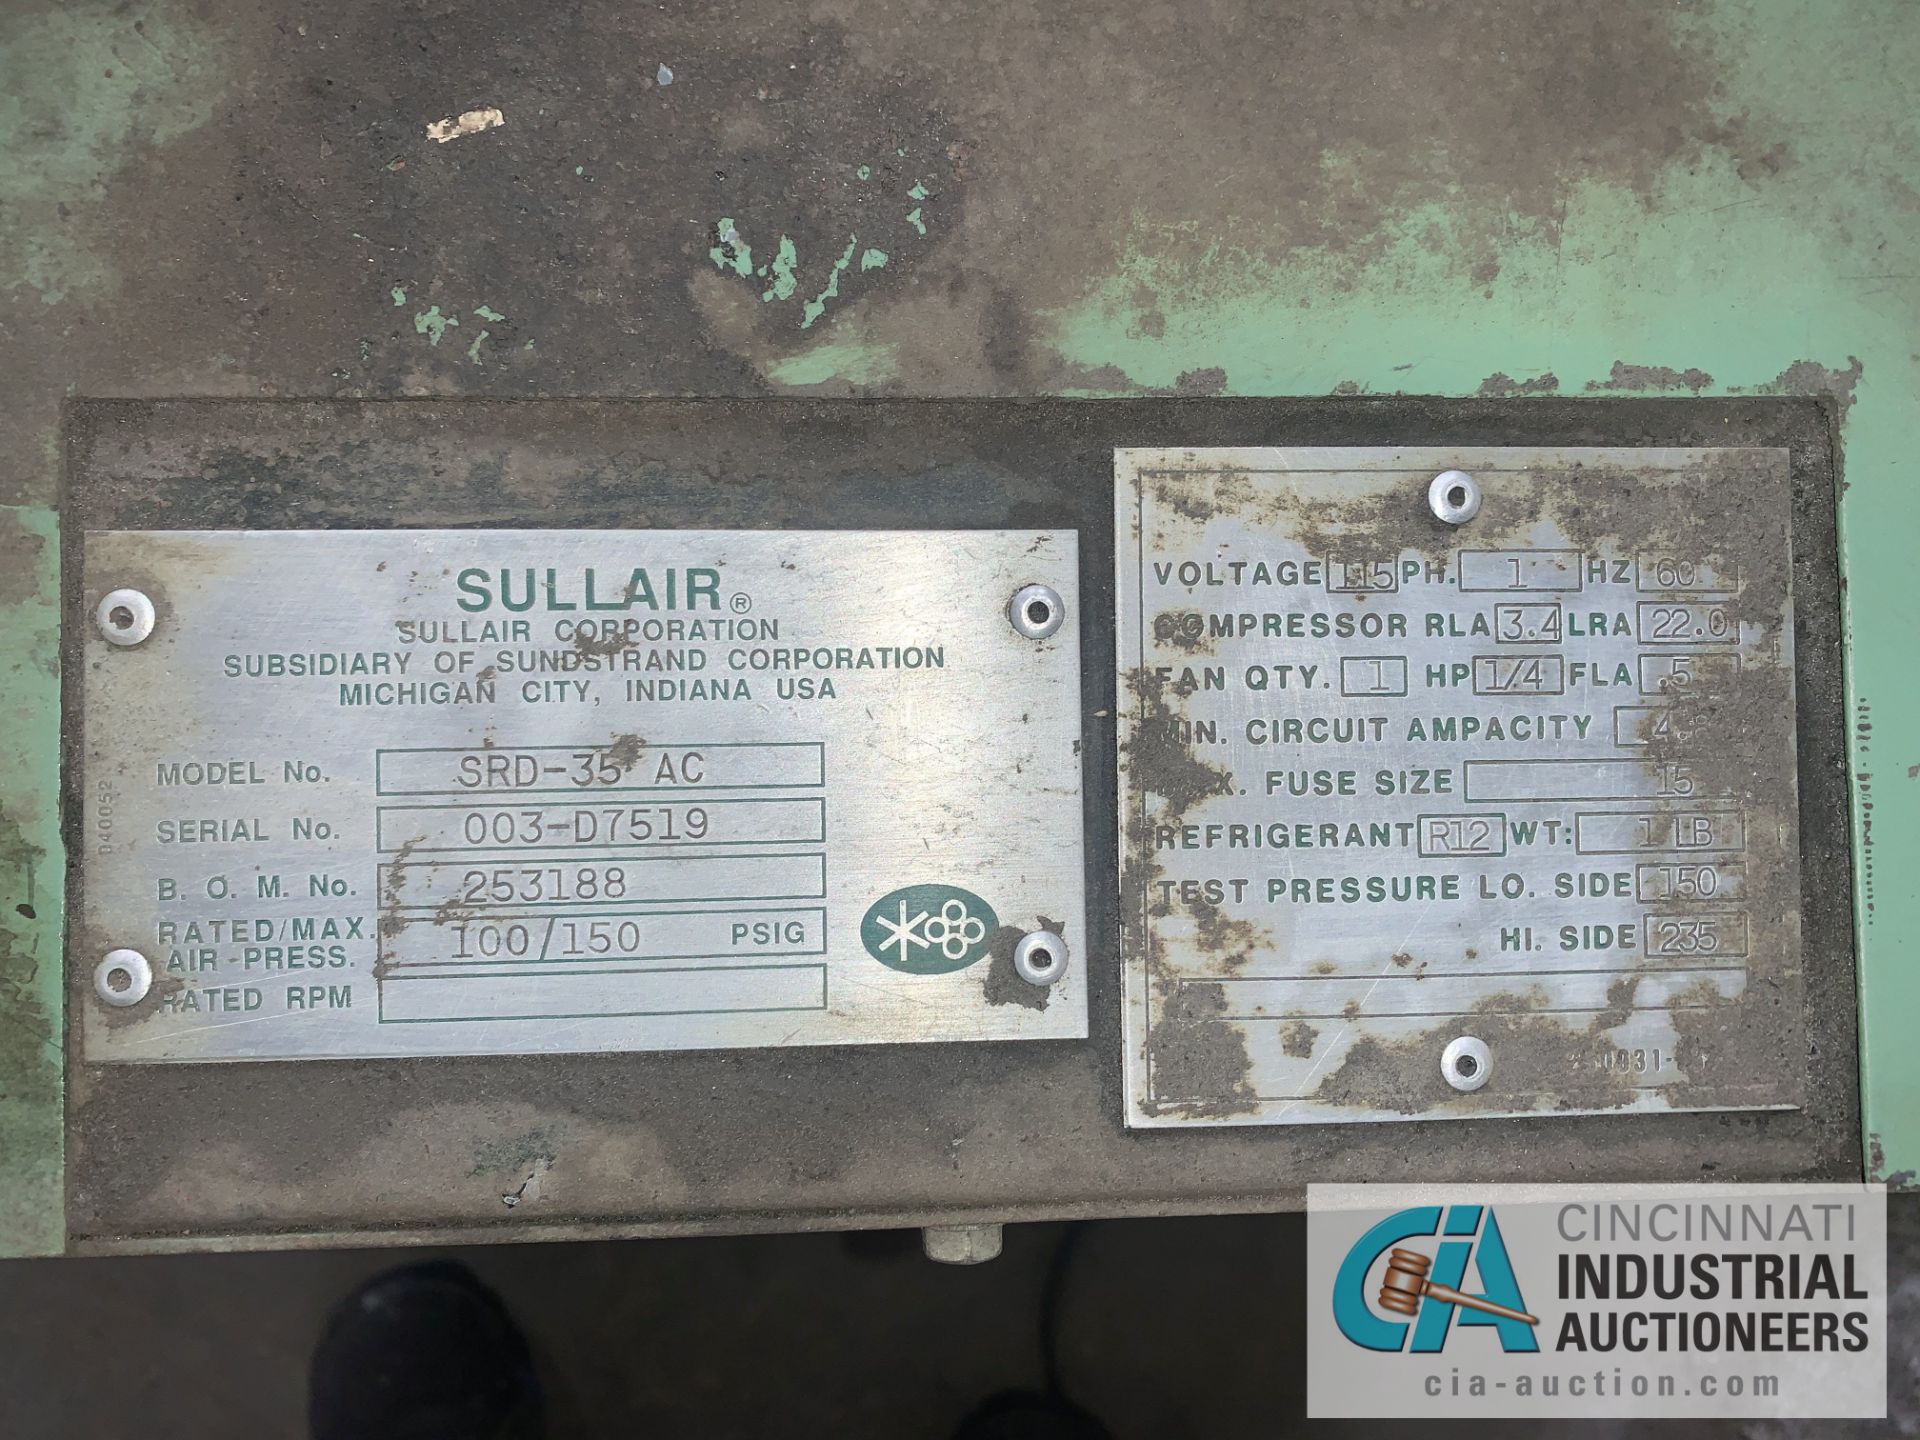 150 PSI SULLAIR MODEL SRD-35 A/C AIR DRYER - $20.00 Rigging Fee Due to Onsite Rigger - Located in - Image 2 of 2